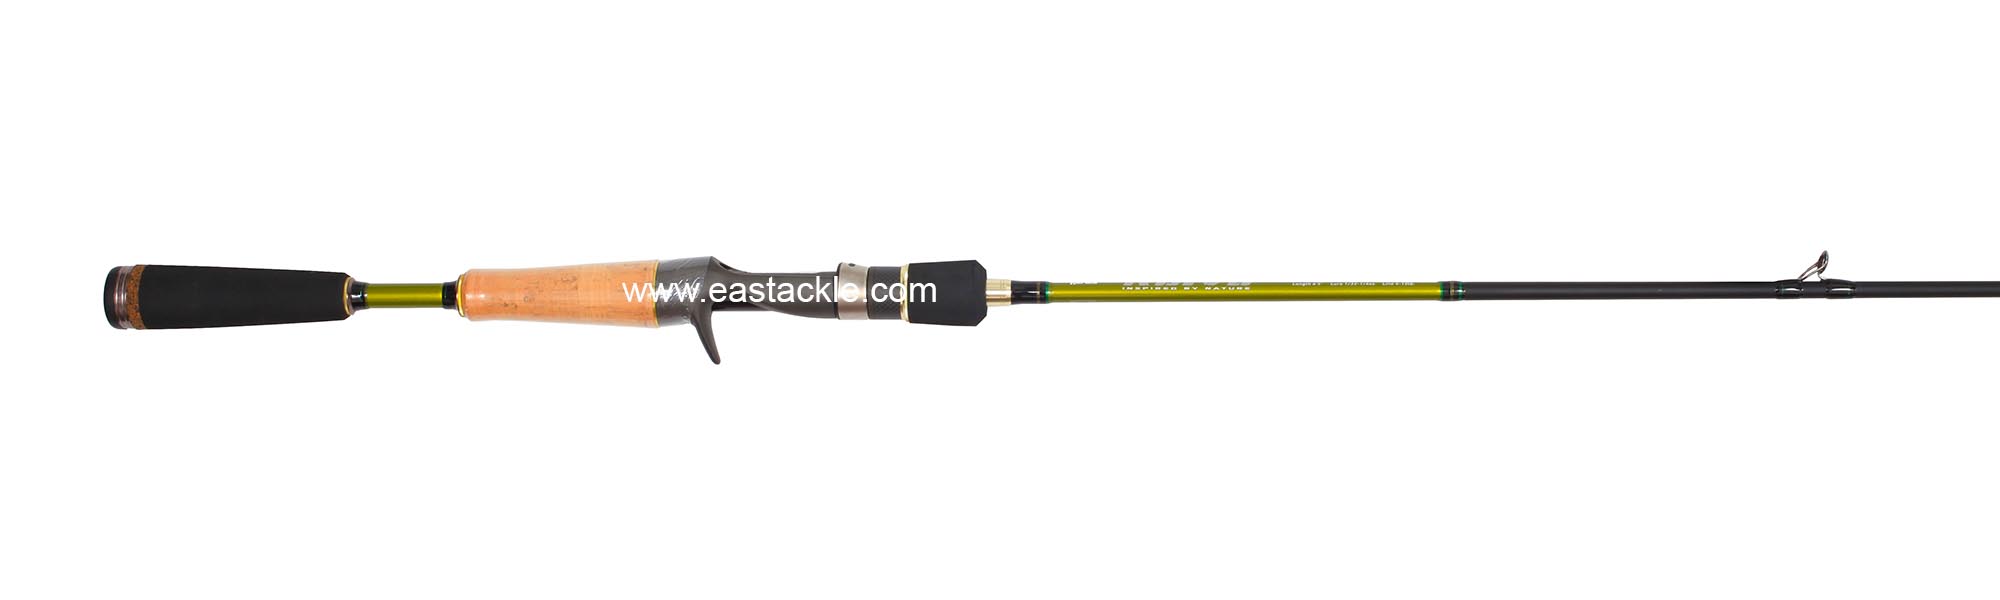 Rapala - Koivu - KVC652ML - Bait Casting Rod - Butt to Stripper Guide (Side View) | Eastackle